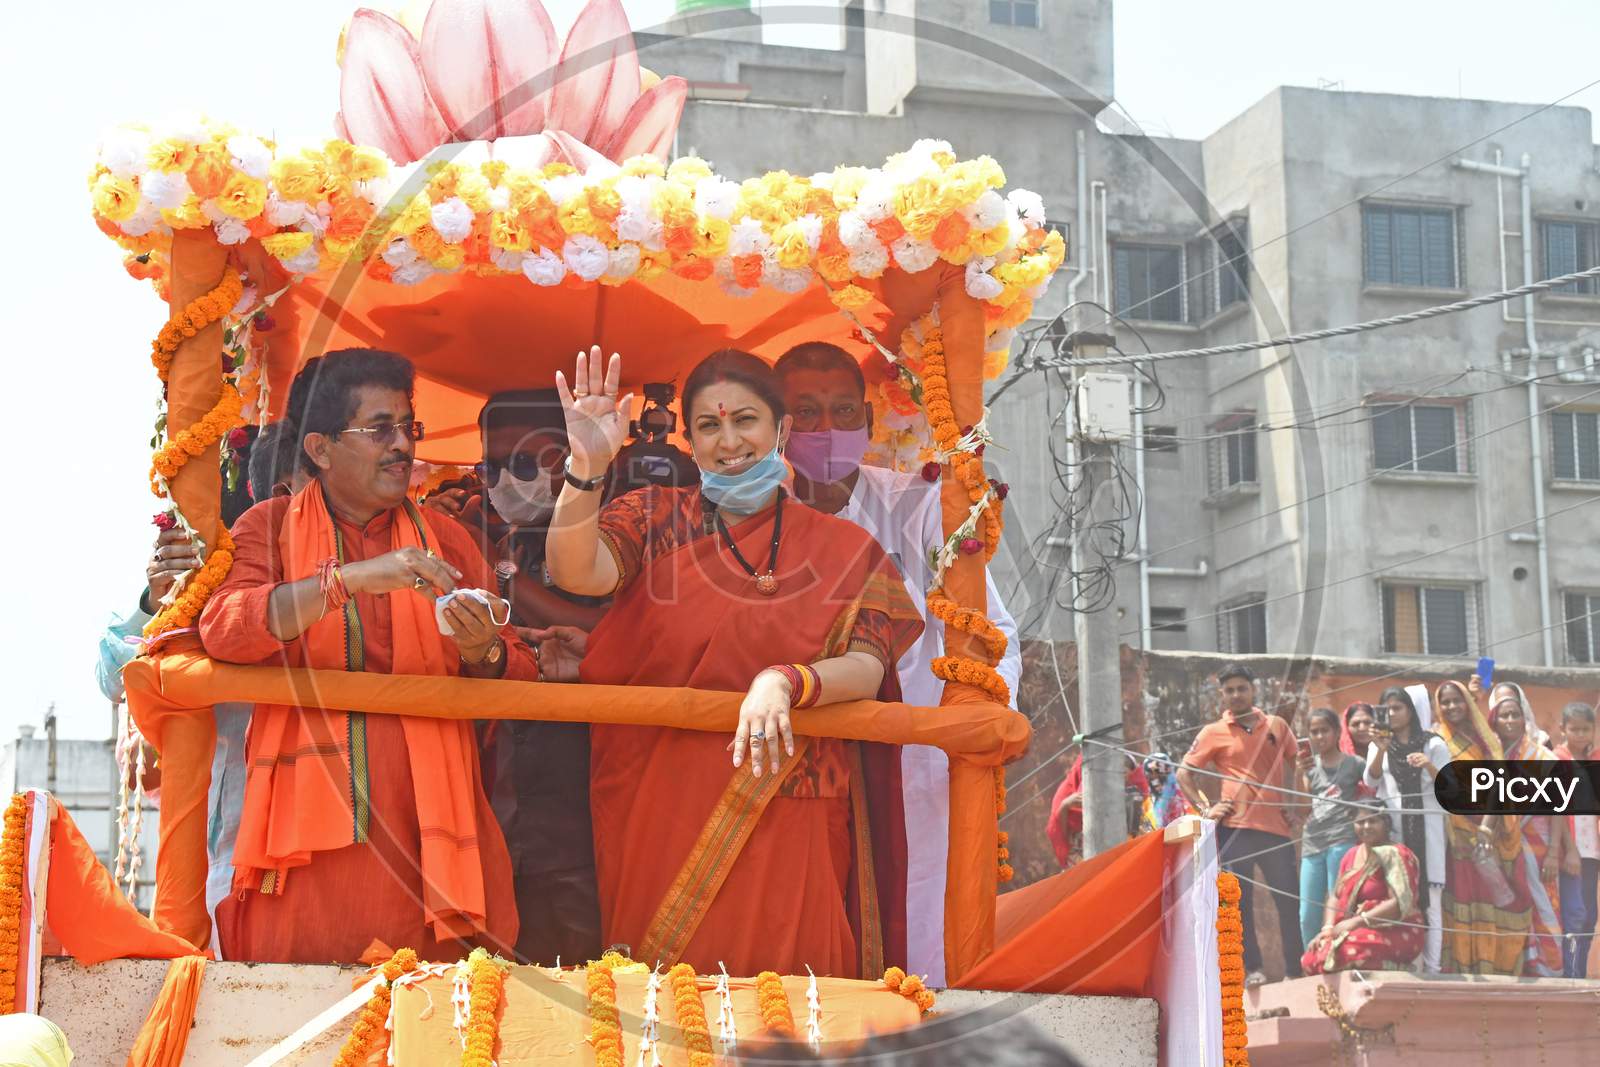 Union Minister for Women and Child Development and Textiles Smriti Zubin Irani held a road show in Burdwan Town in support of BJP candidate Sandip Nandi from Burdwan Dakshin Assembly constituency.